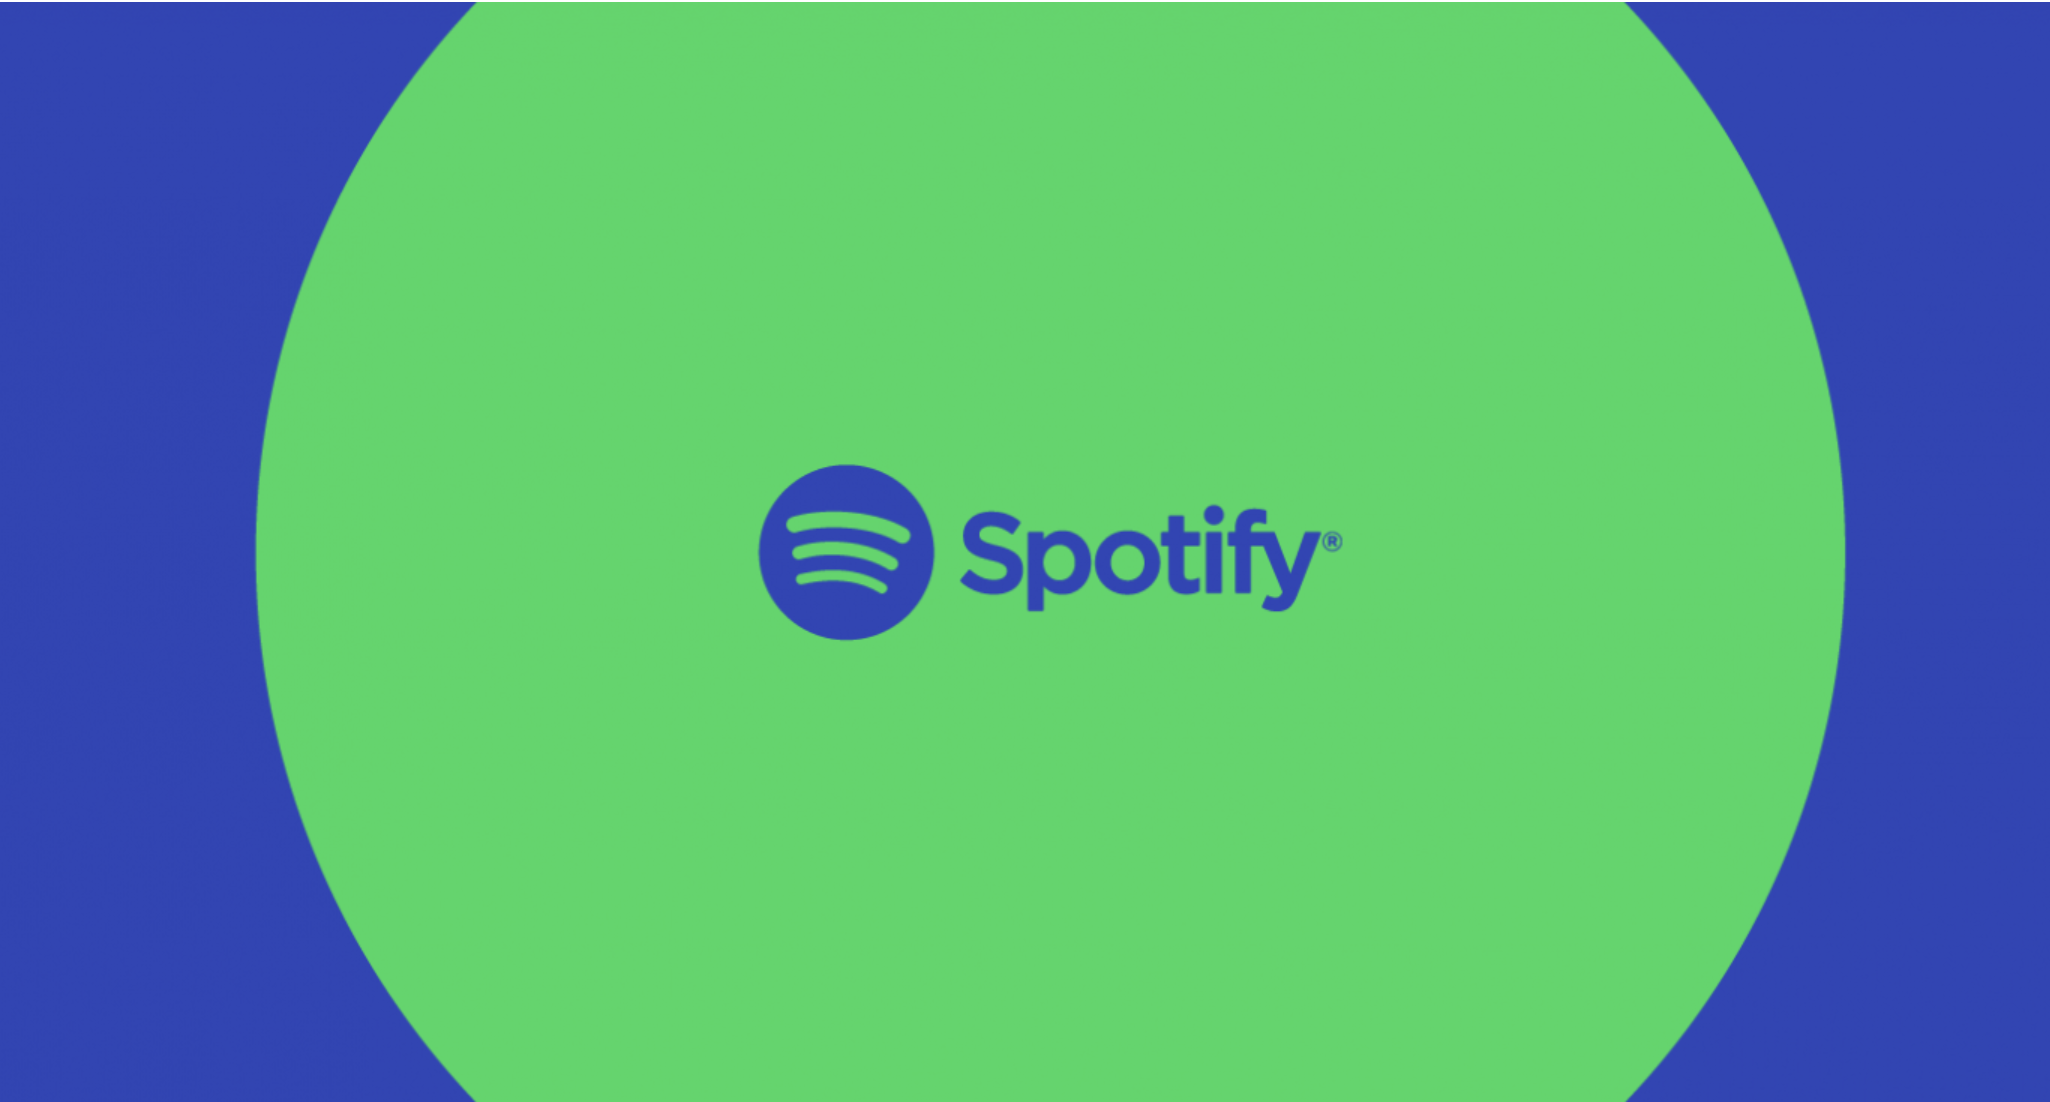 Spotify is going live with plans for new live audio experience